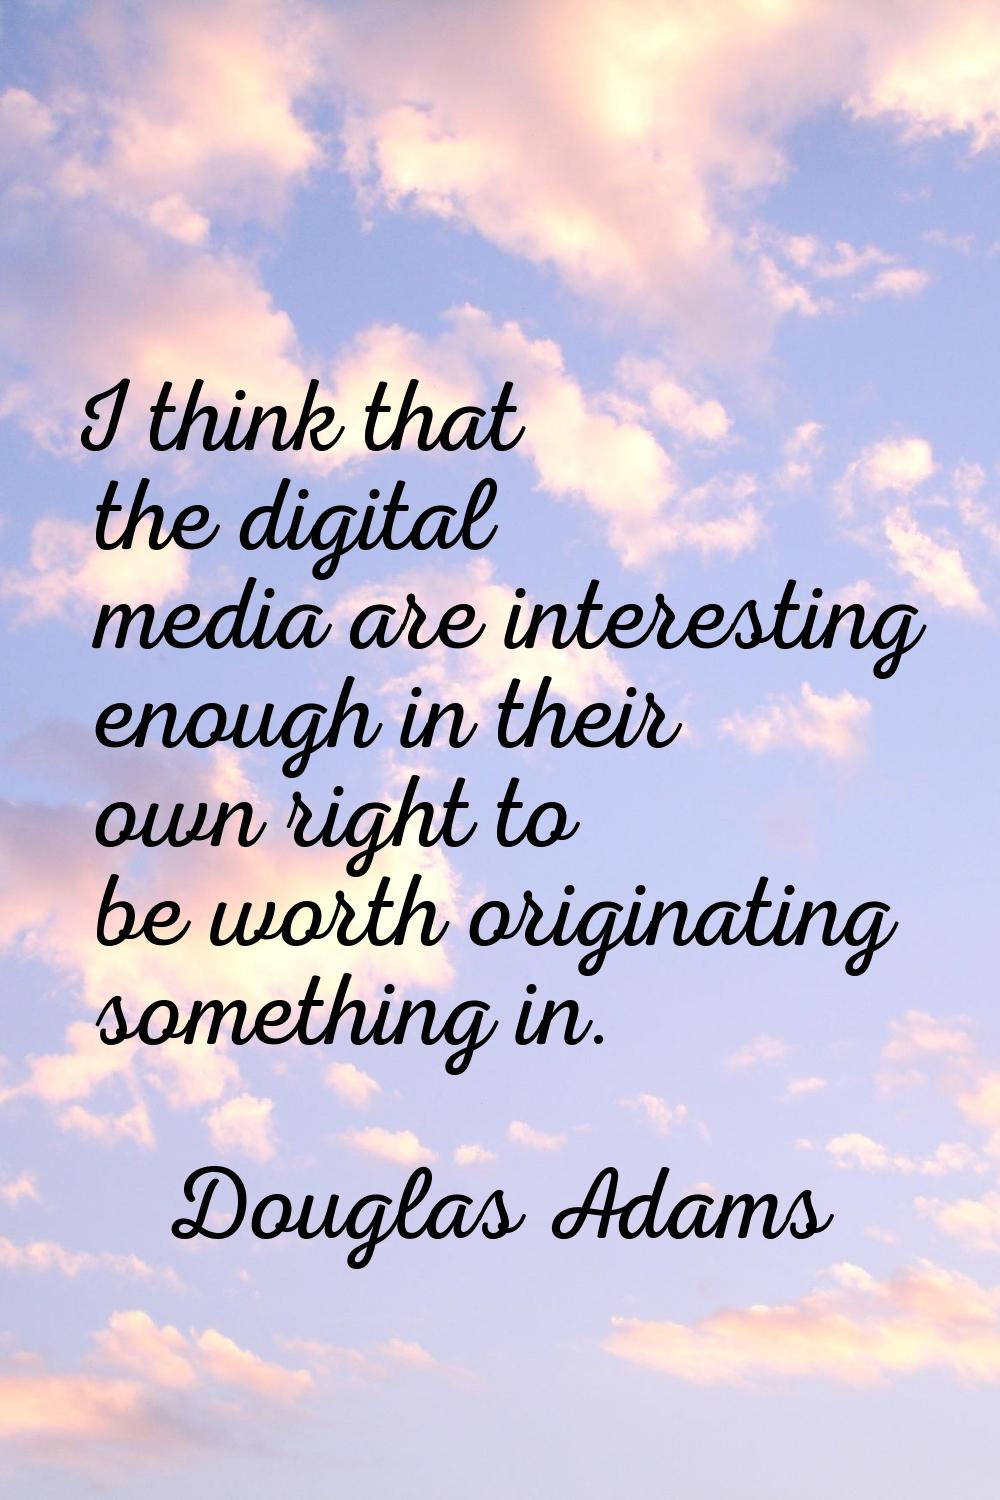 I think that the digital media are interesting enough in their own right to be worth originating so